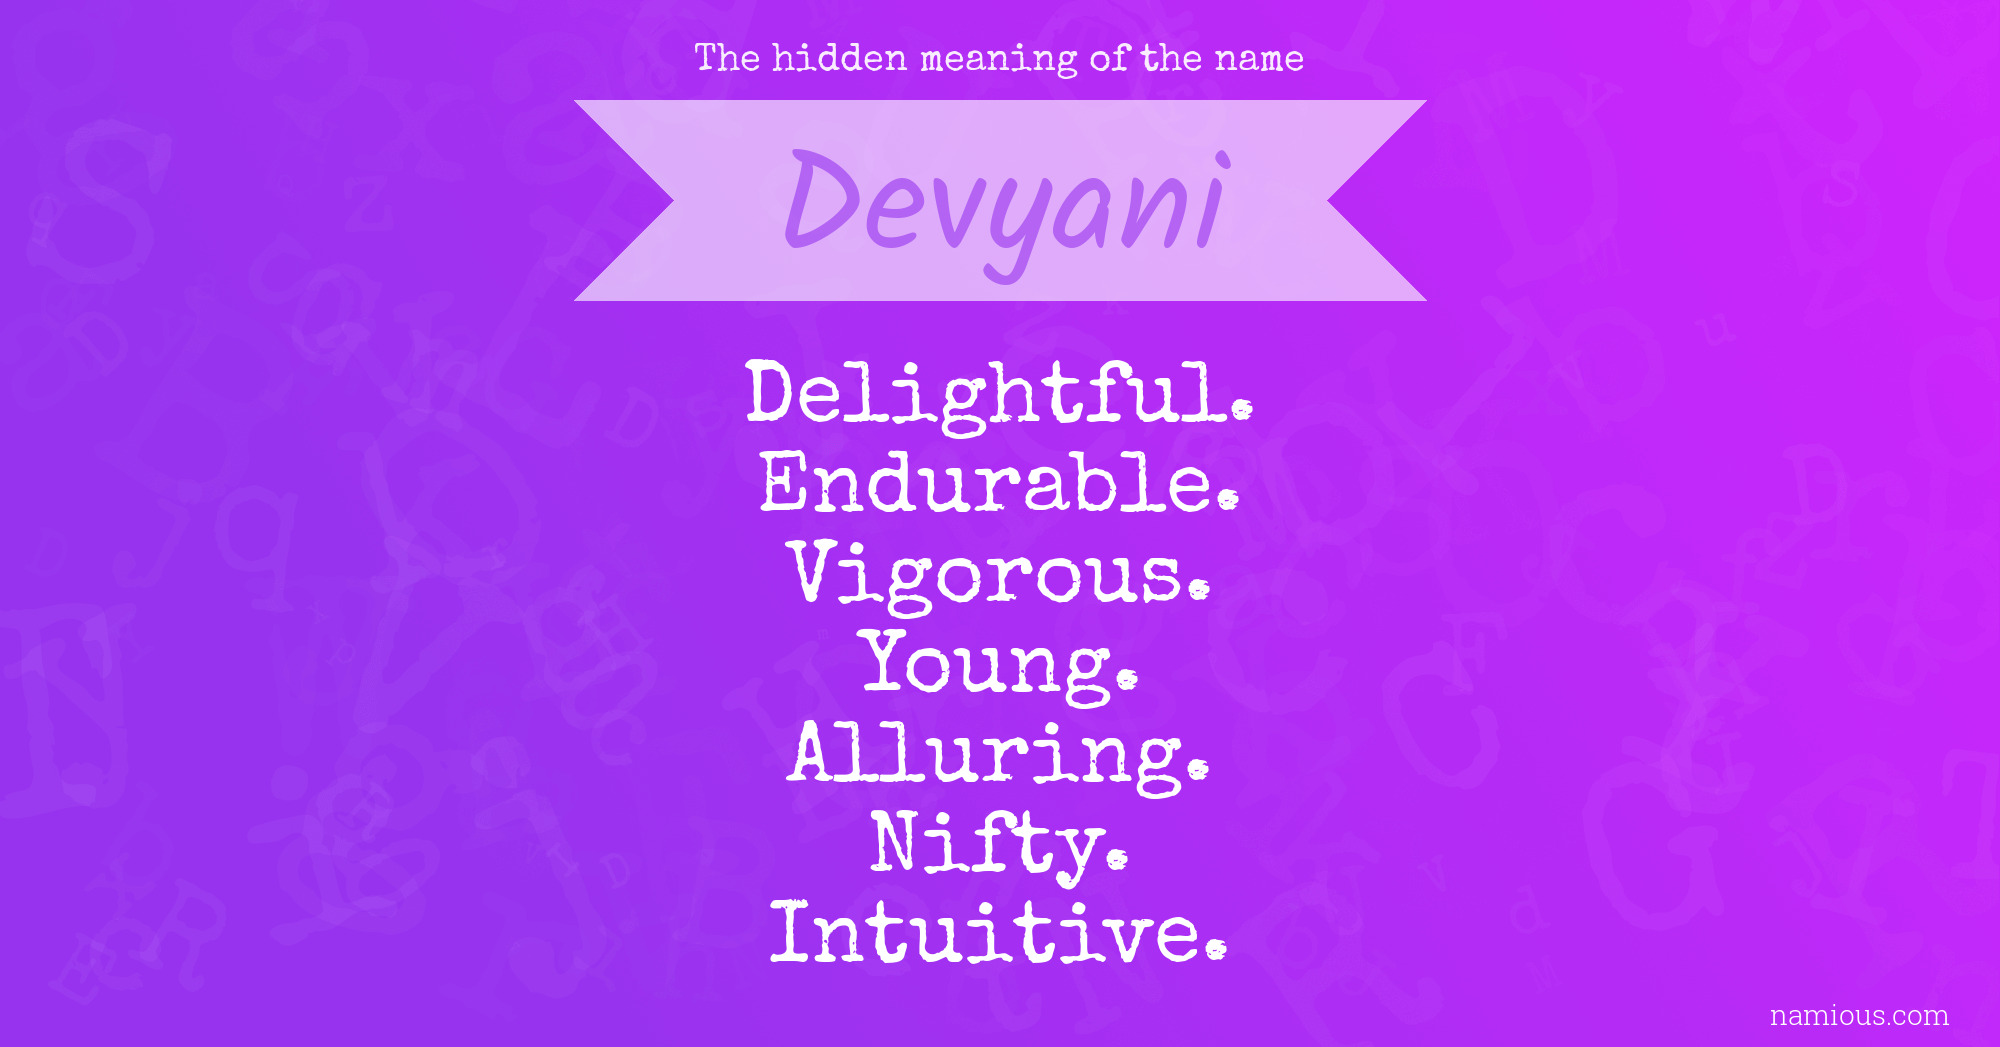 The hidden meaning of the name Devyani